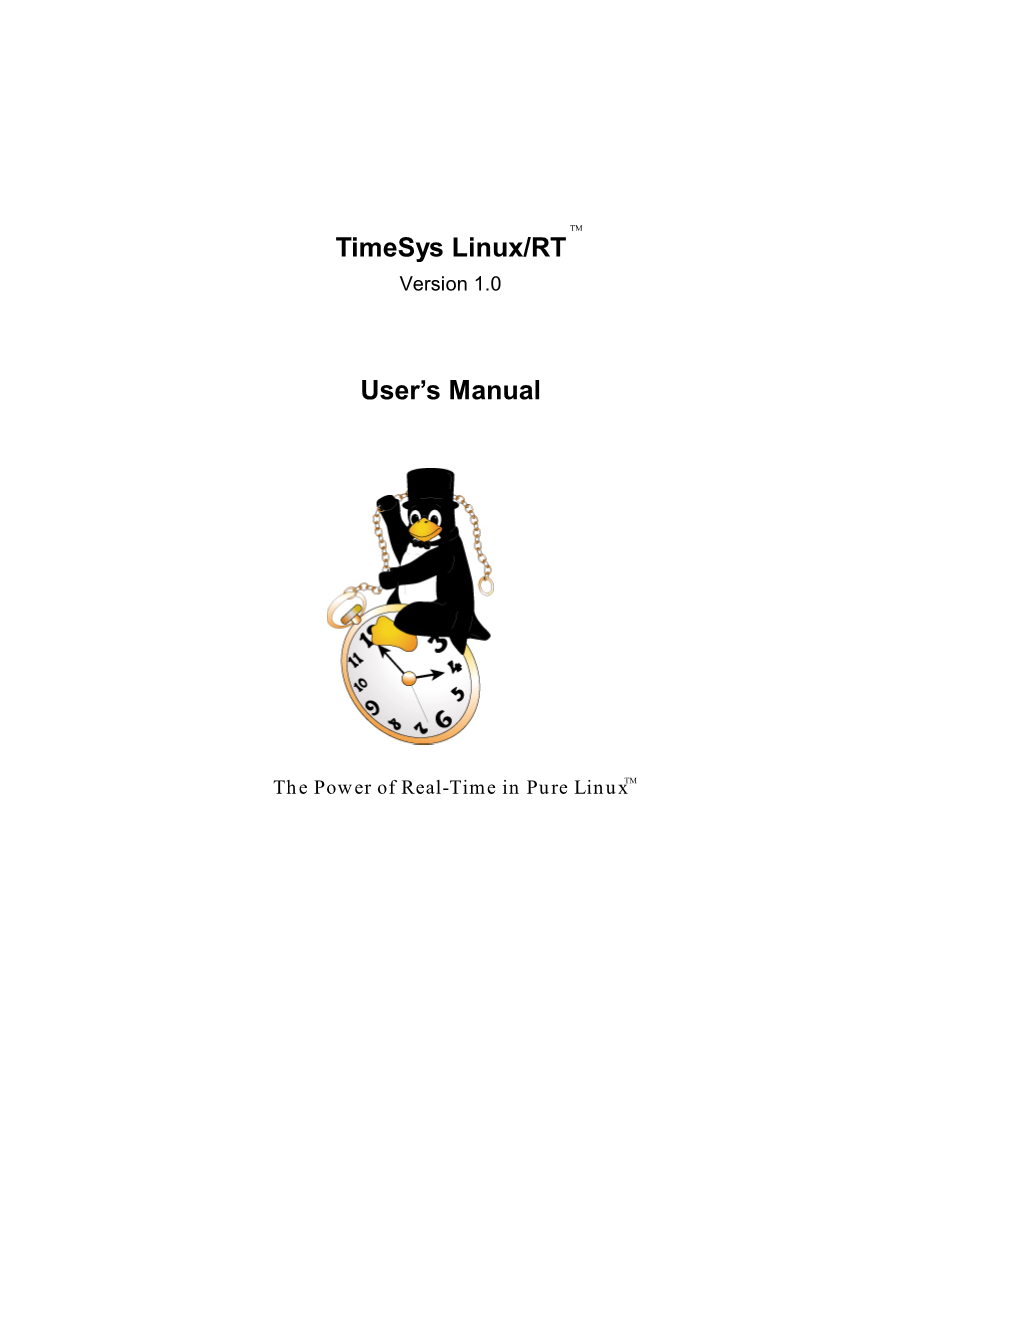 Timesys Linux/RT User's Manual